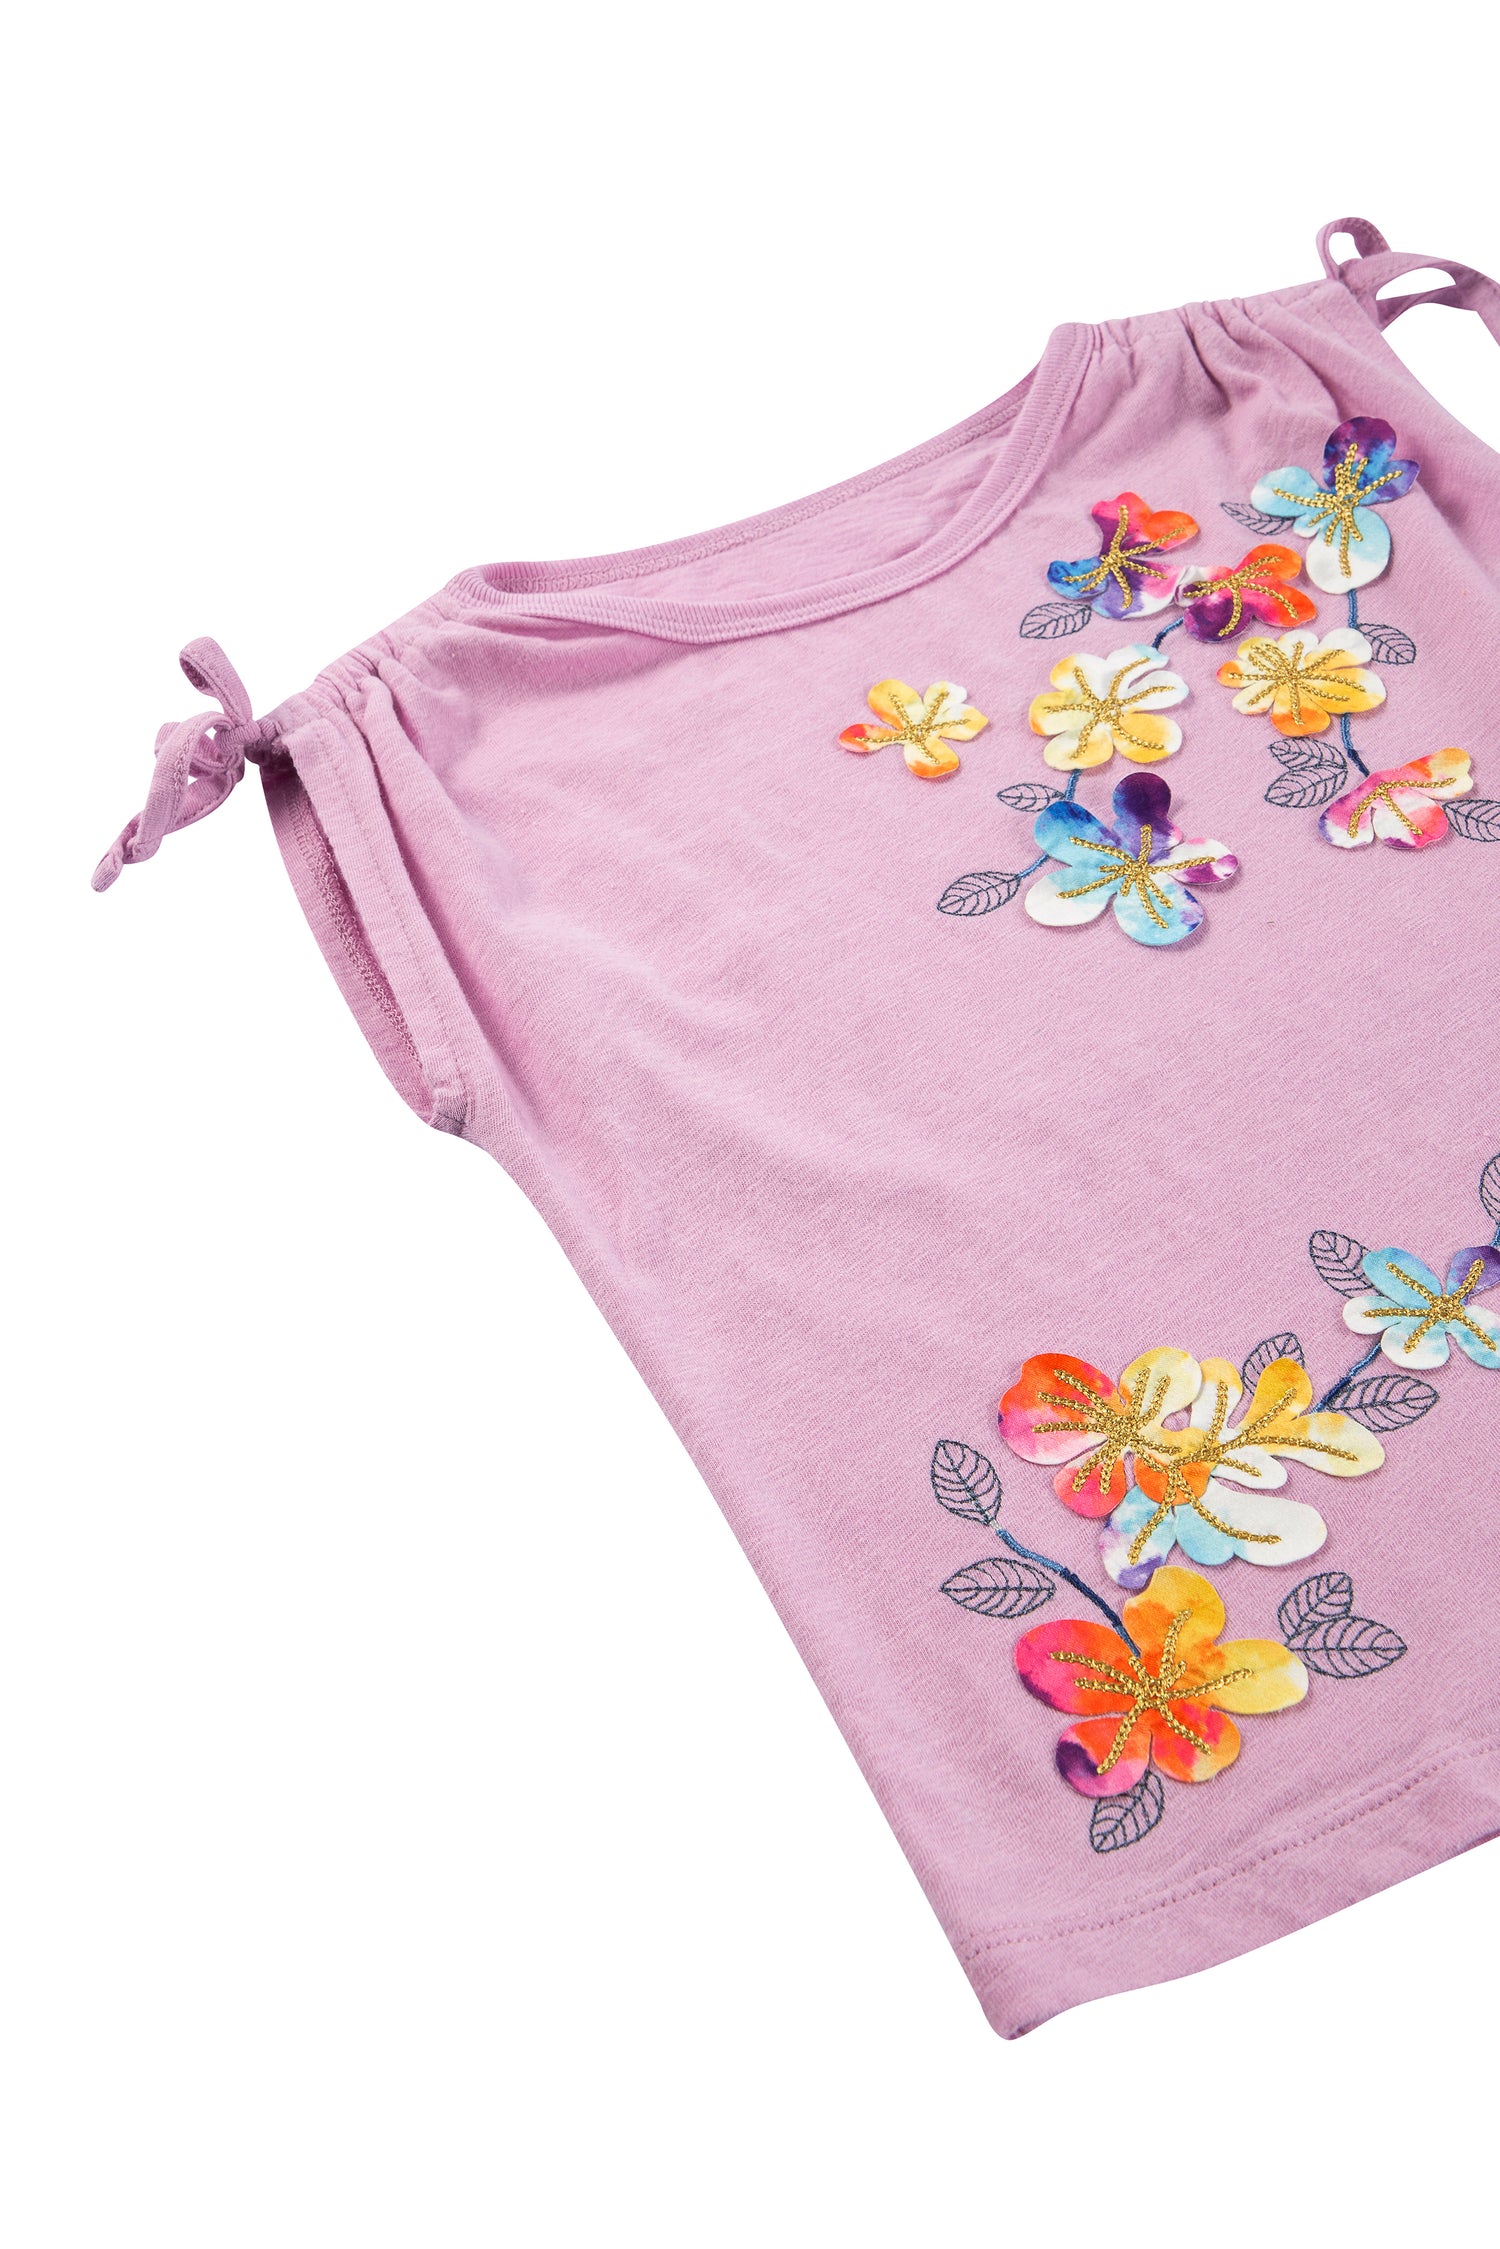 CLOSE UP OF PINK SHORT-SLEEVE TOP WITH APPLIQUED FLOWERS